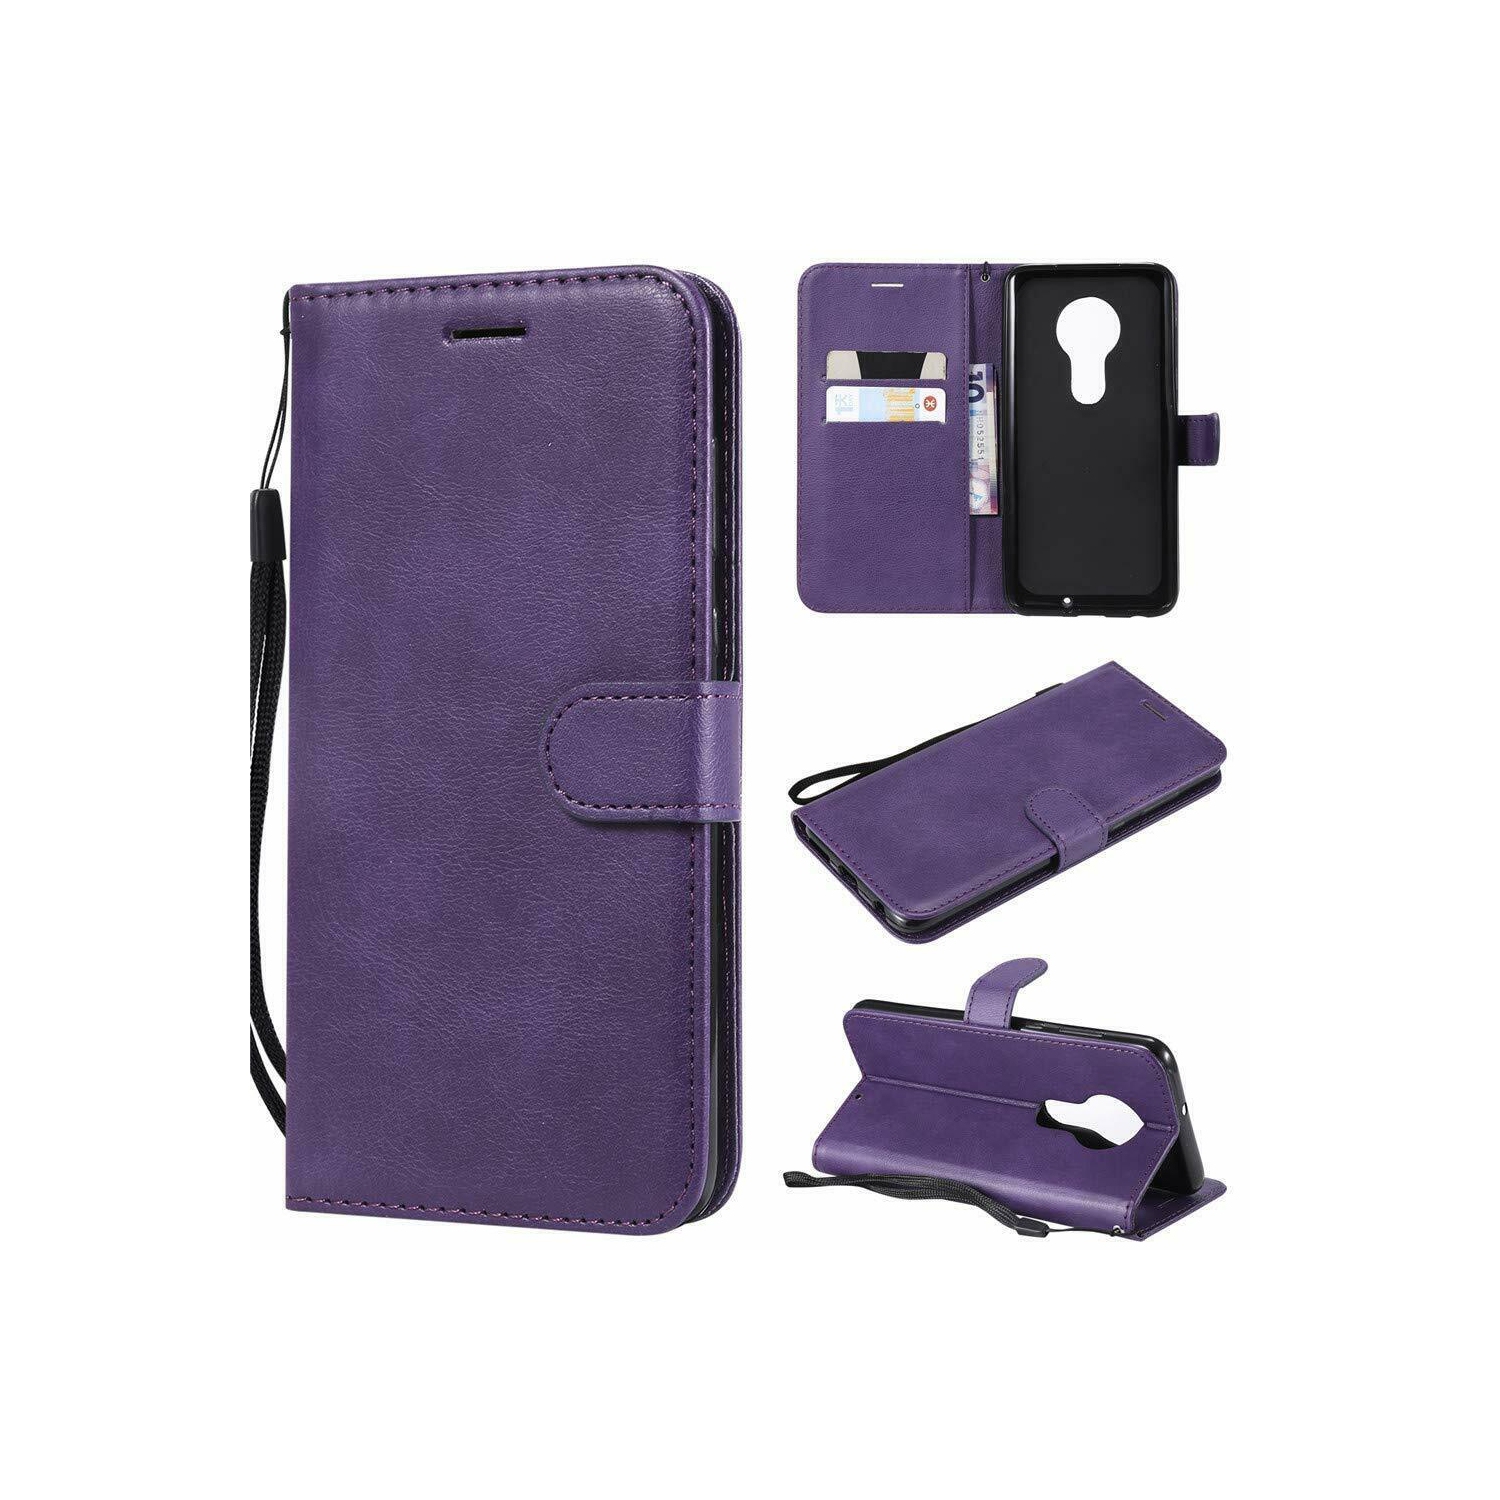 [CS] Motorola Moto G7 Play Case, Magnetic Leather Folio Wallet Flip Case Cover with Card Slot, Purple